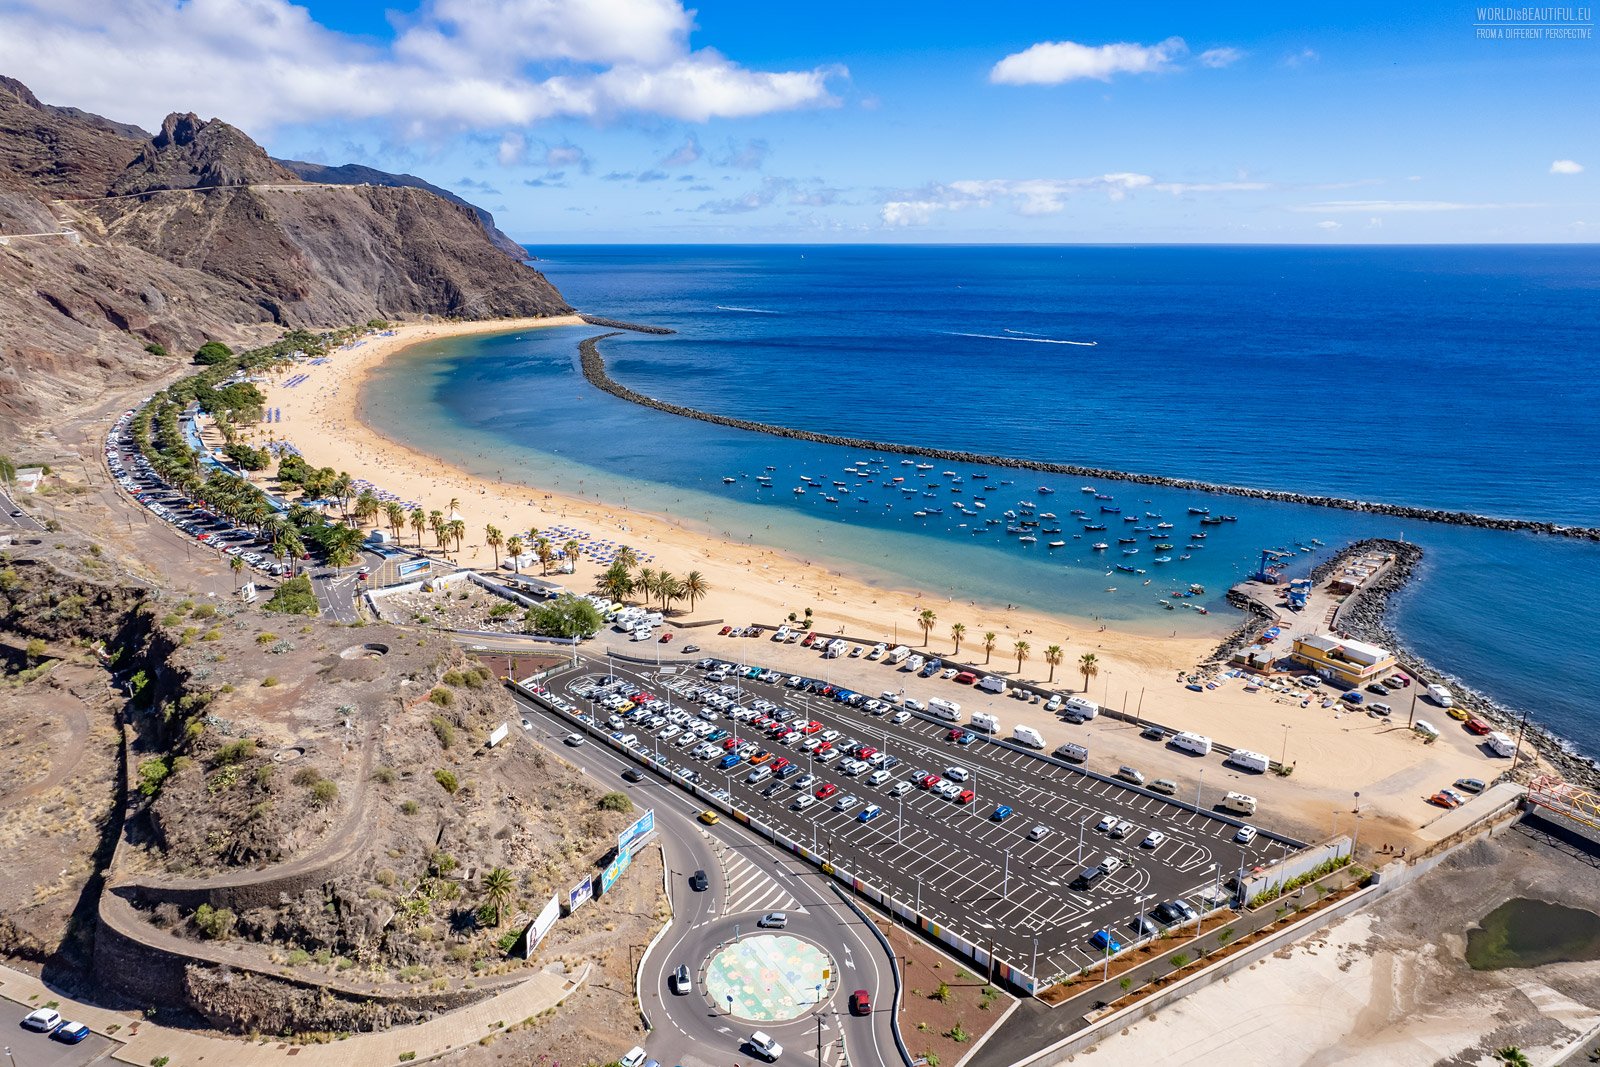 The most beautiful beaches in Tenerife